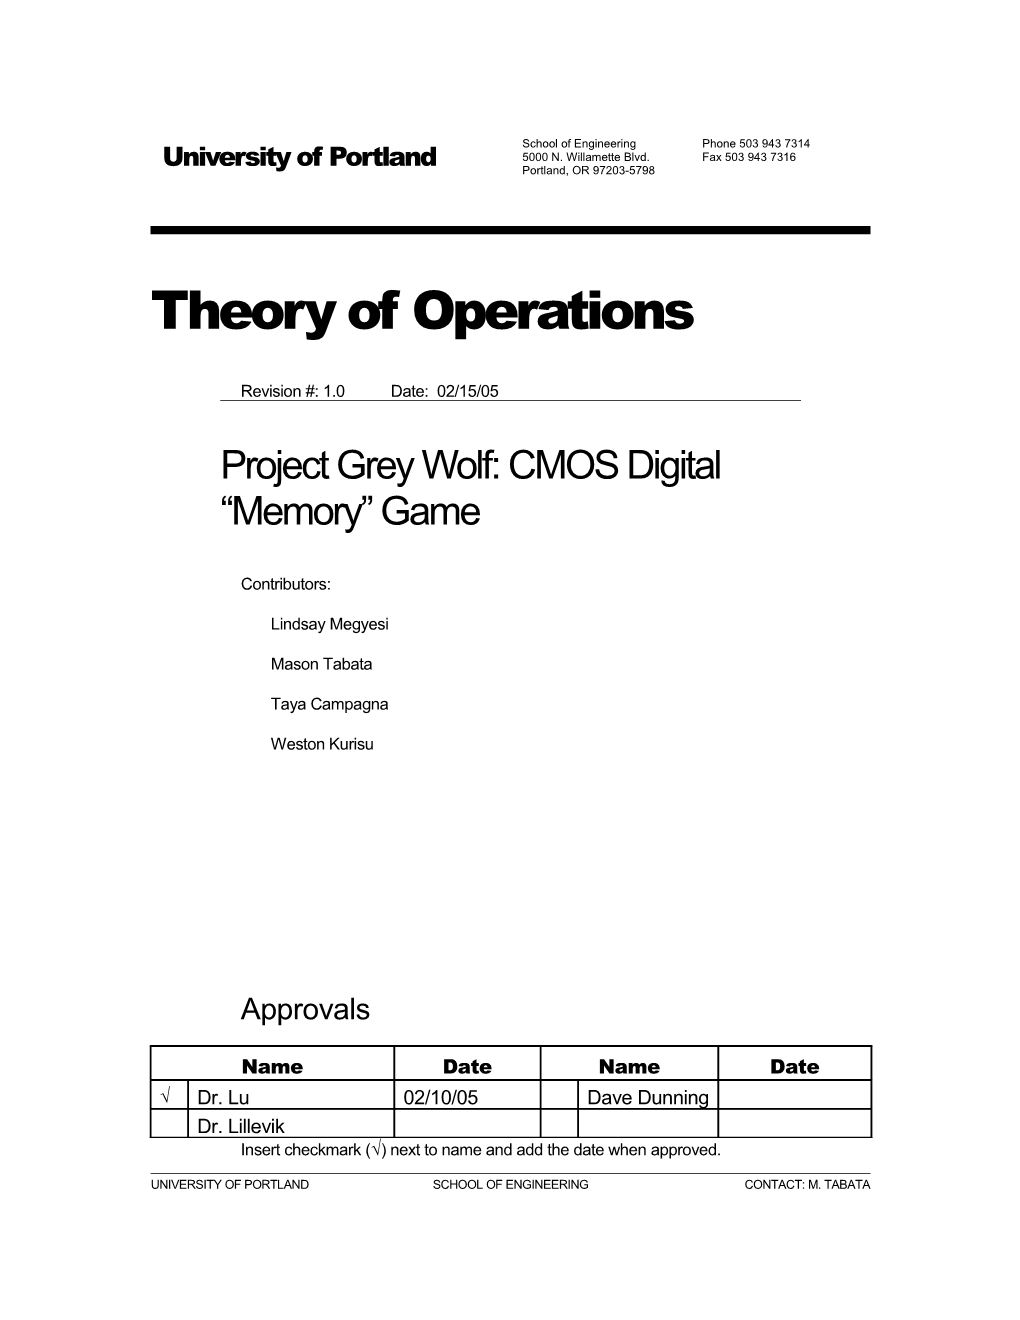 Theory of Operations s2